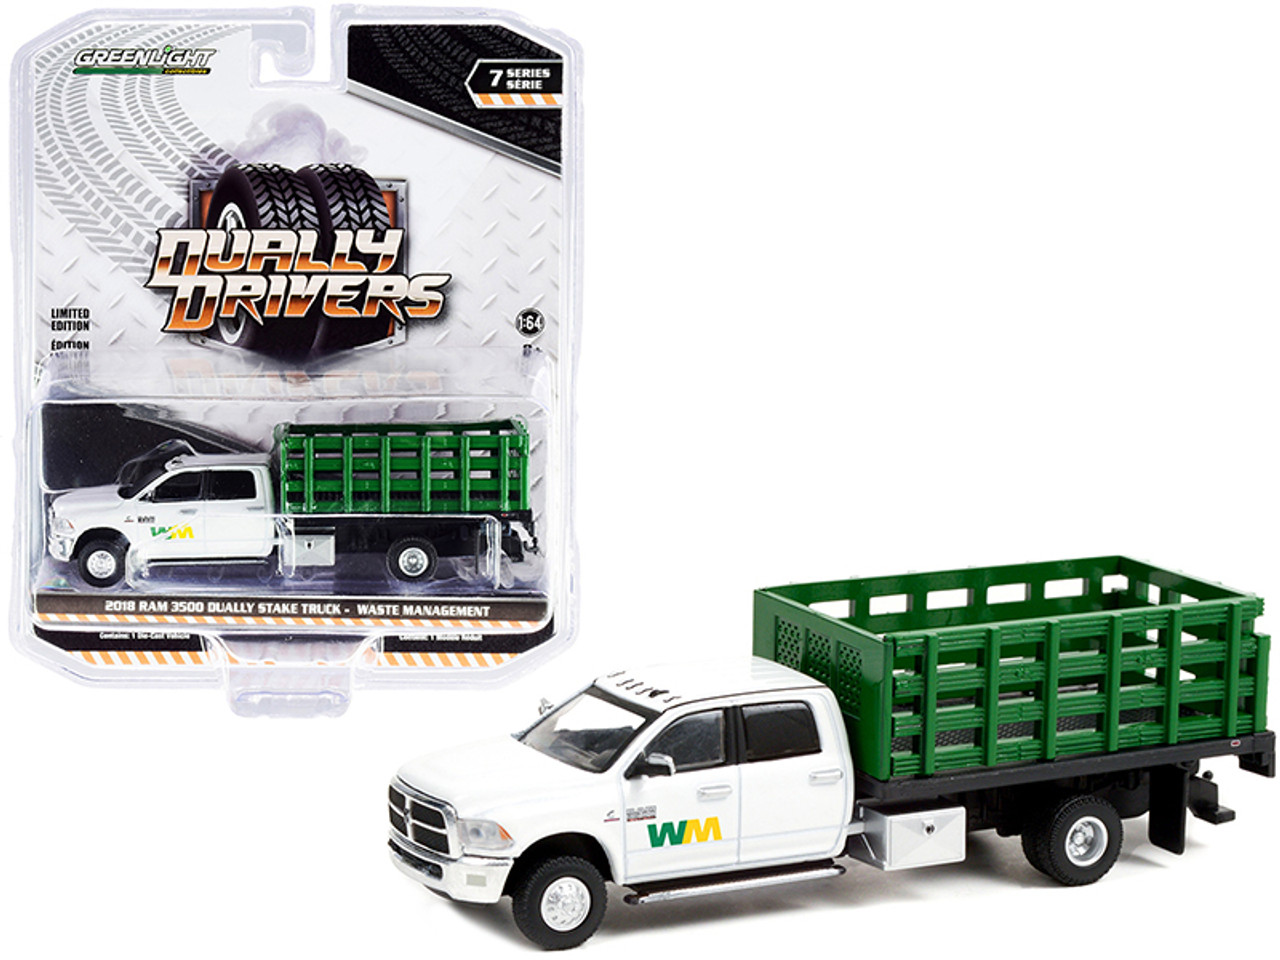 2018 Dodge RAM 3500 Dually Stake Truck "Waste Management" White and Green "Dually Drivers" Series 7 1/64 Diecast Model Car by Greenlight